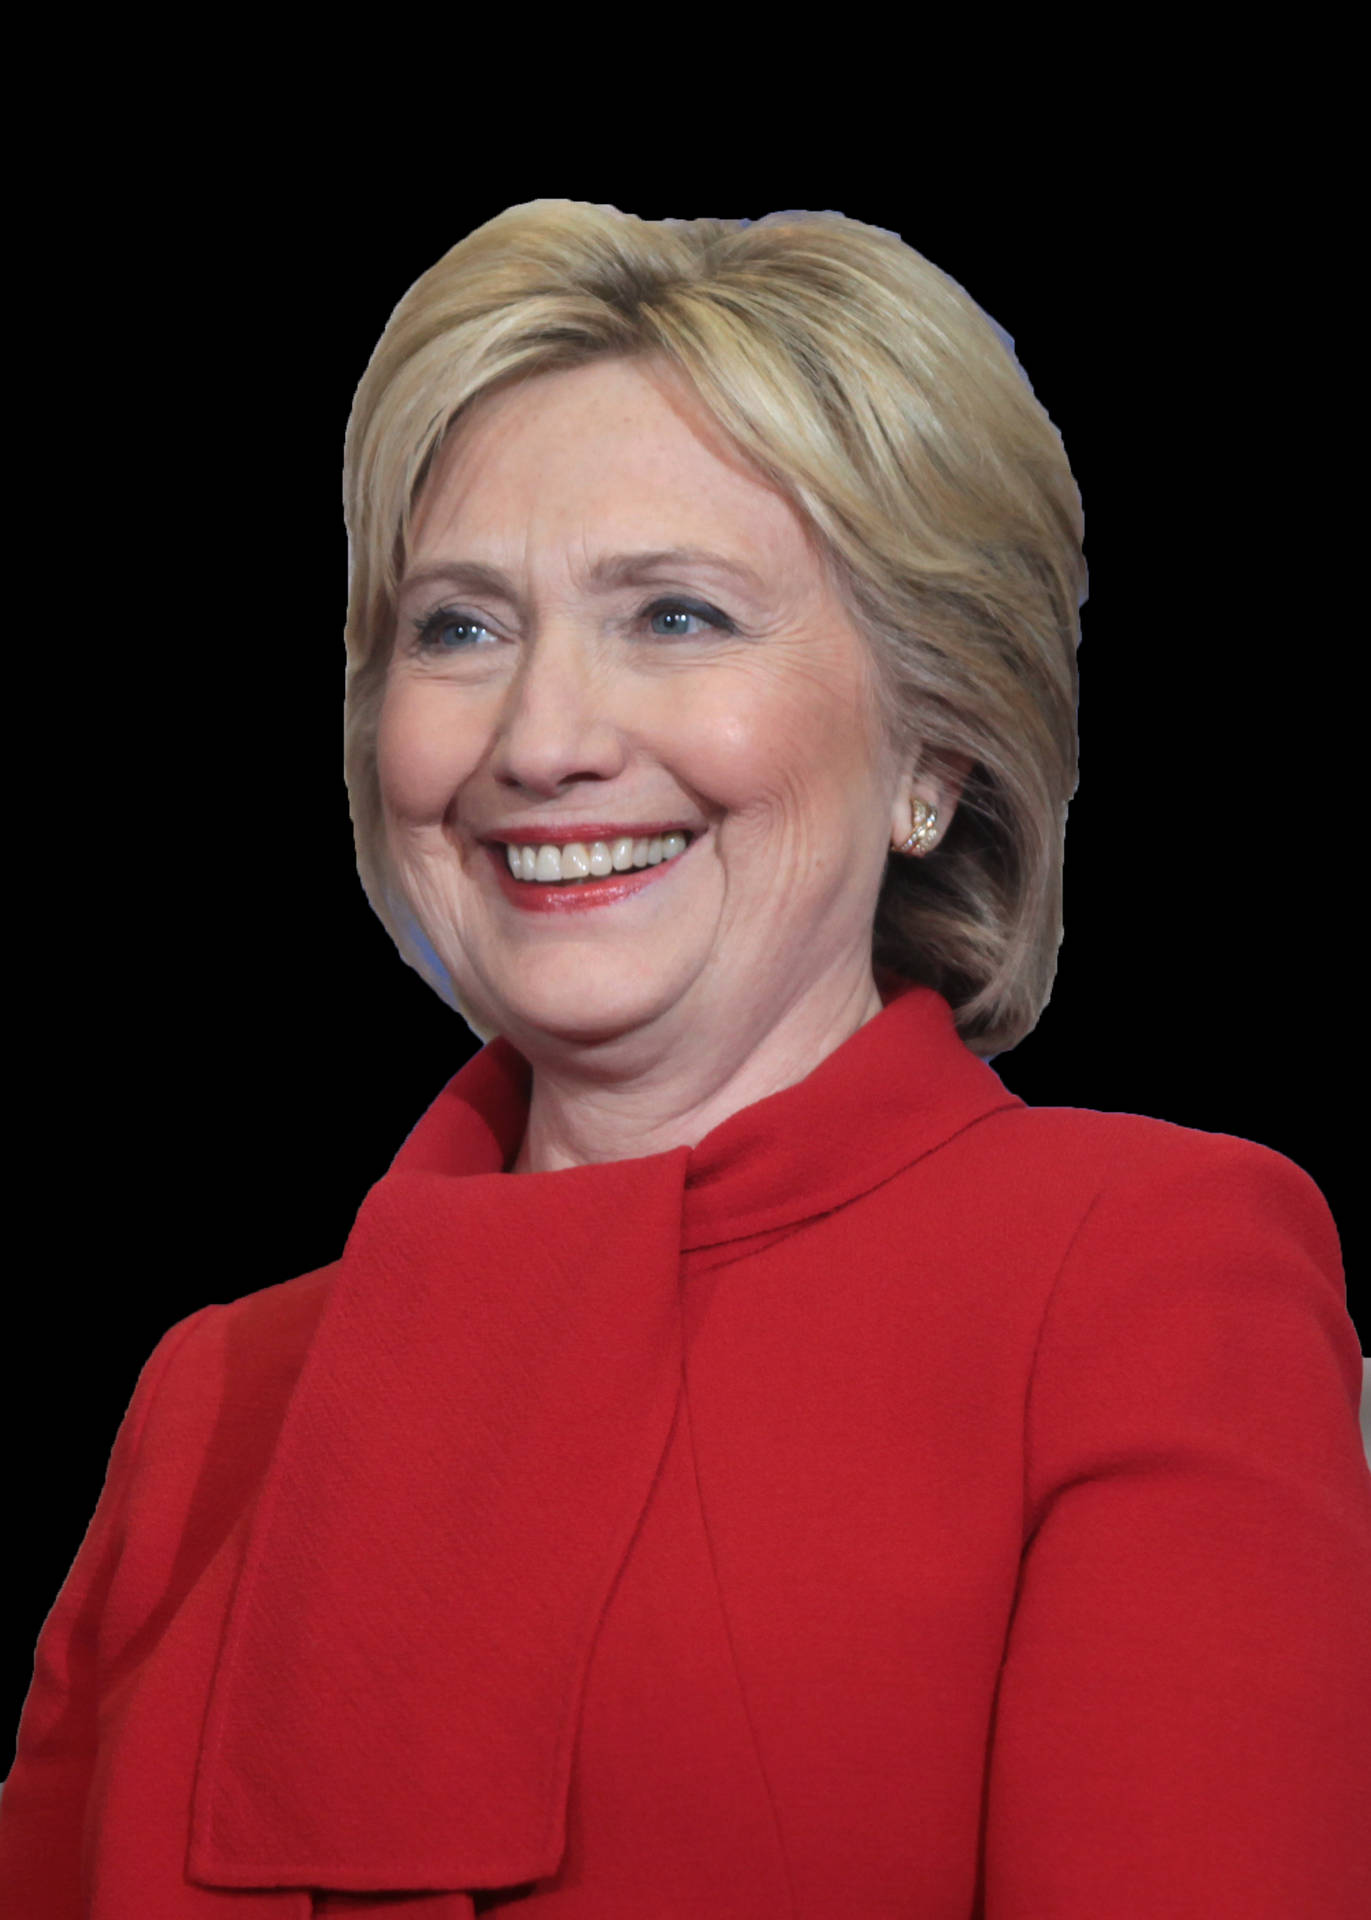 Hillary Clinton Elegantly Dressed In A Red Suit